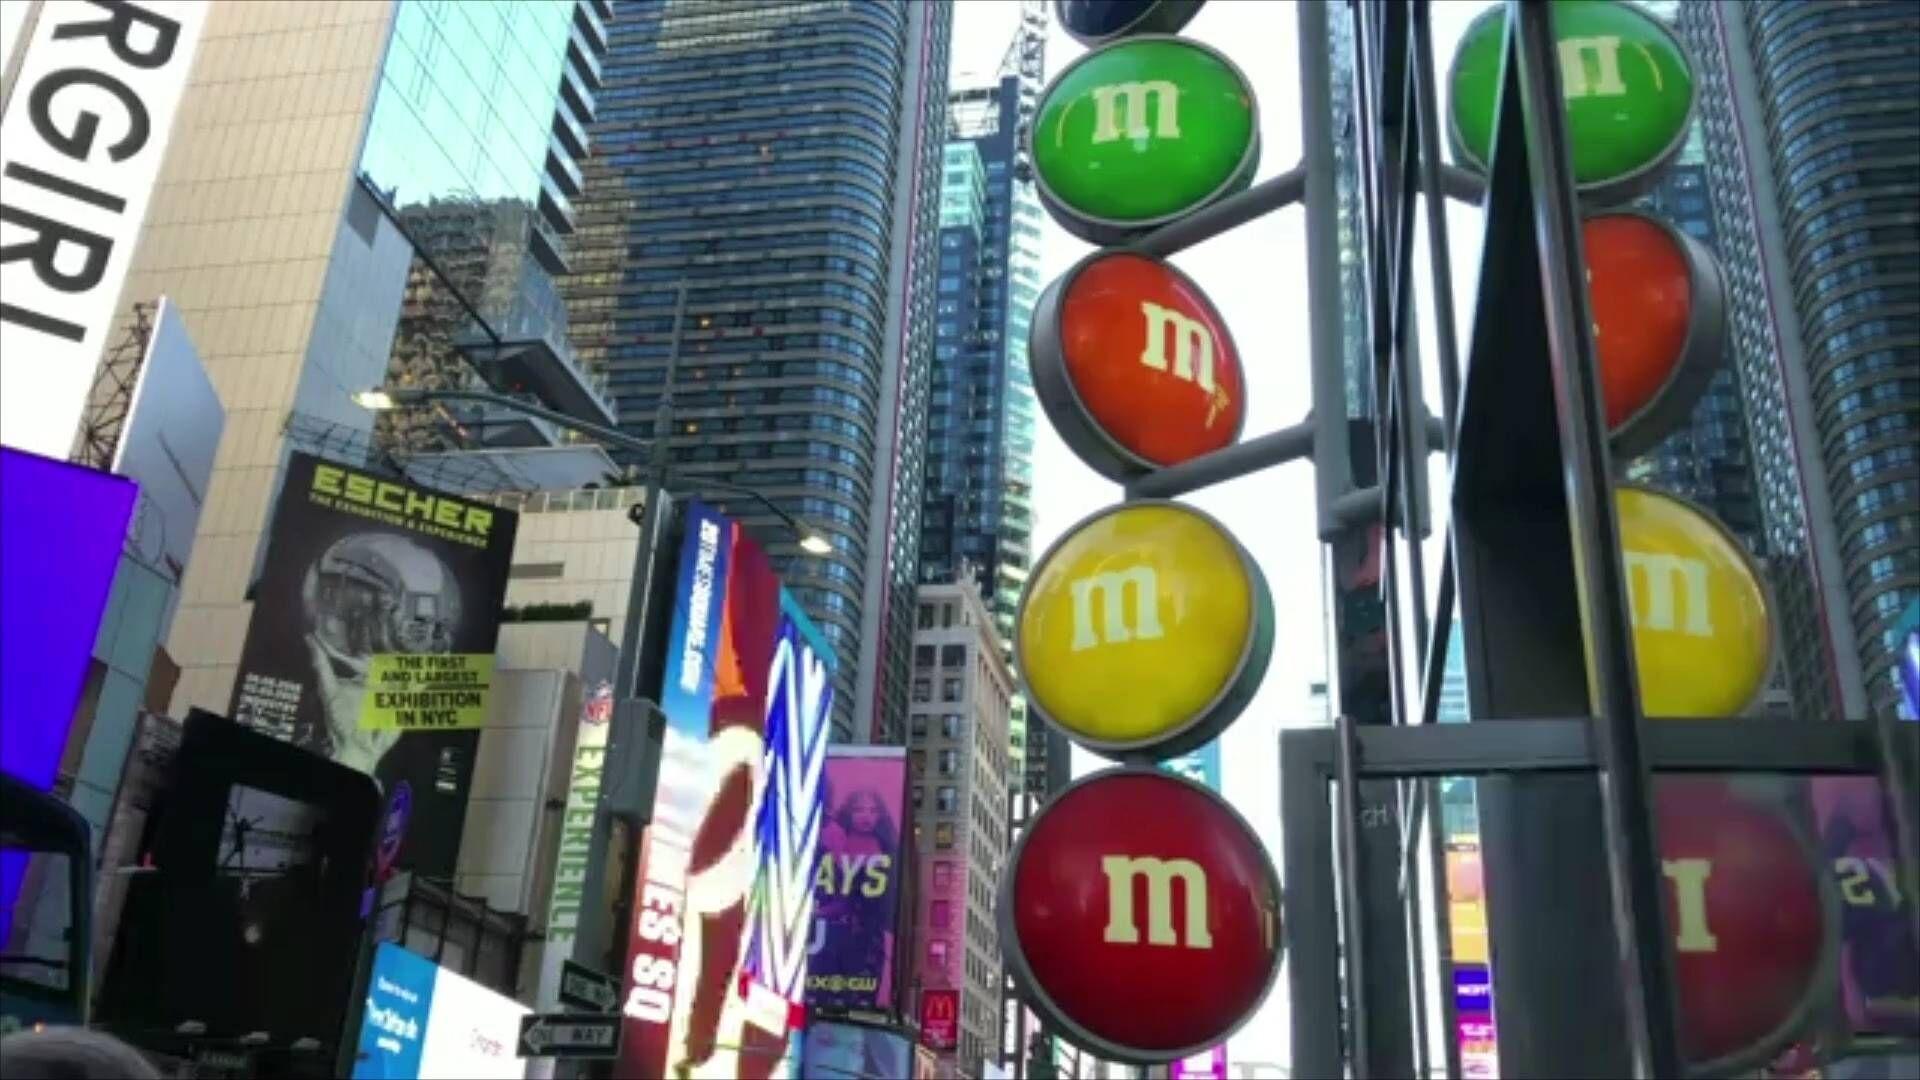 Mars returns for Super Bowl LVII ad spot with M&M'S